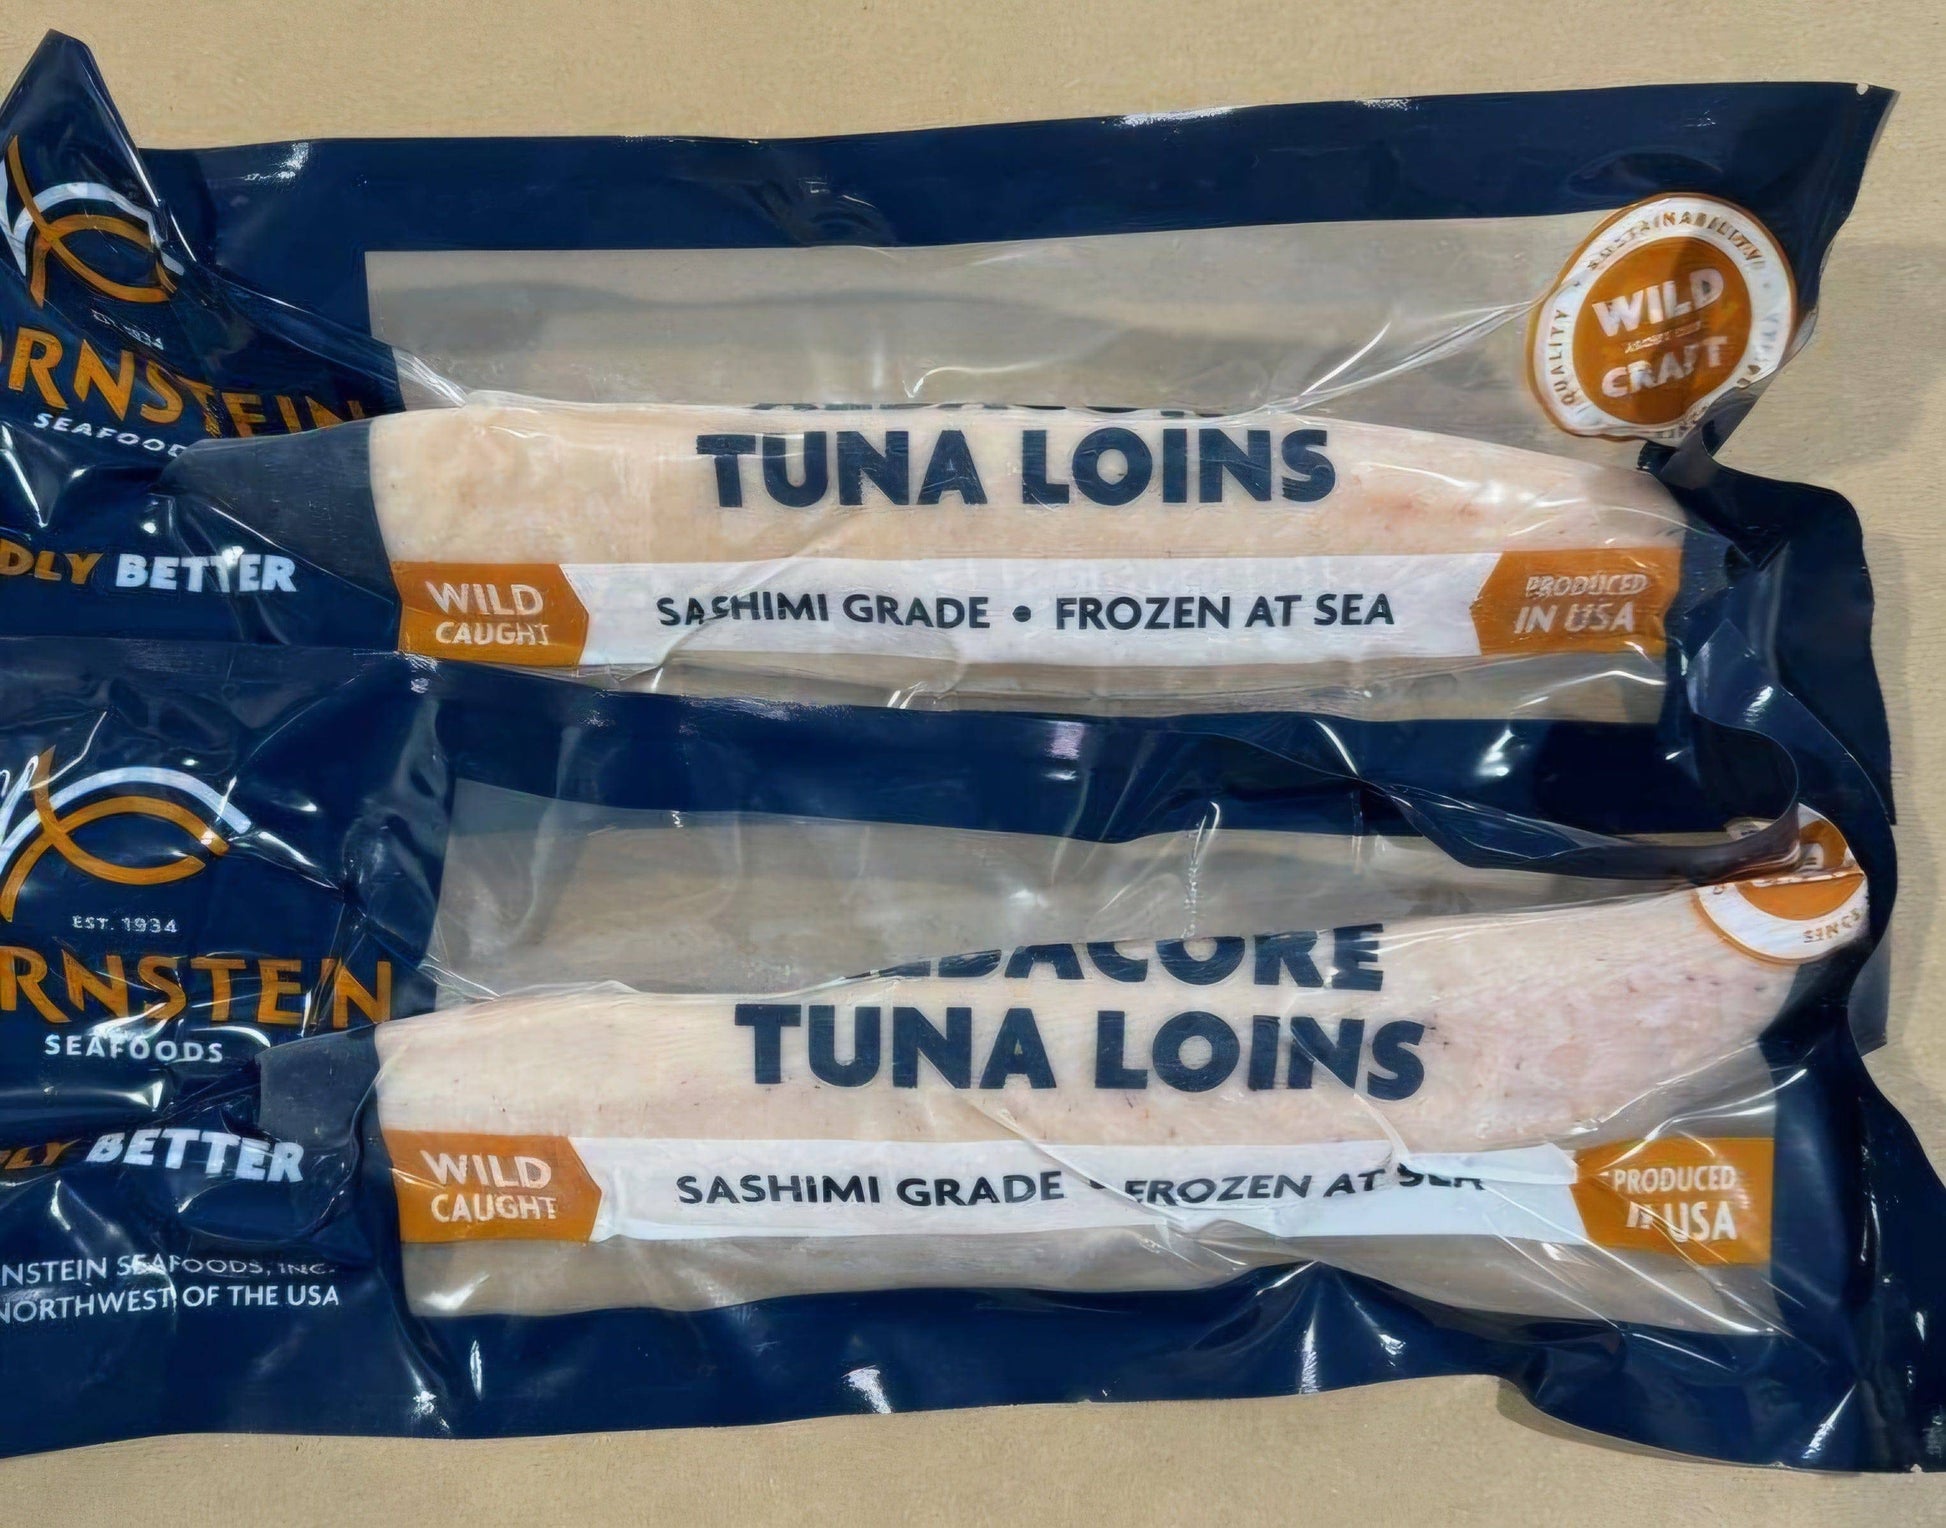 Albacore Tuna Loins packaging front